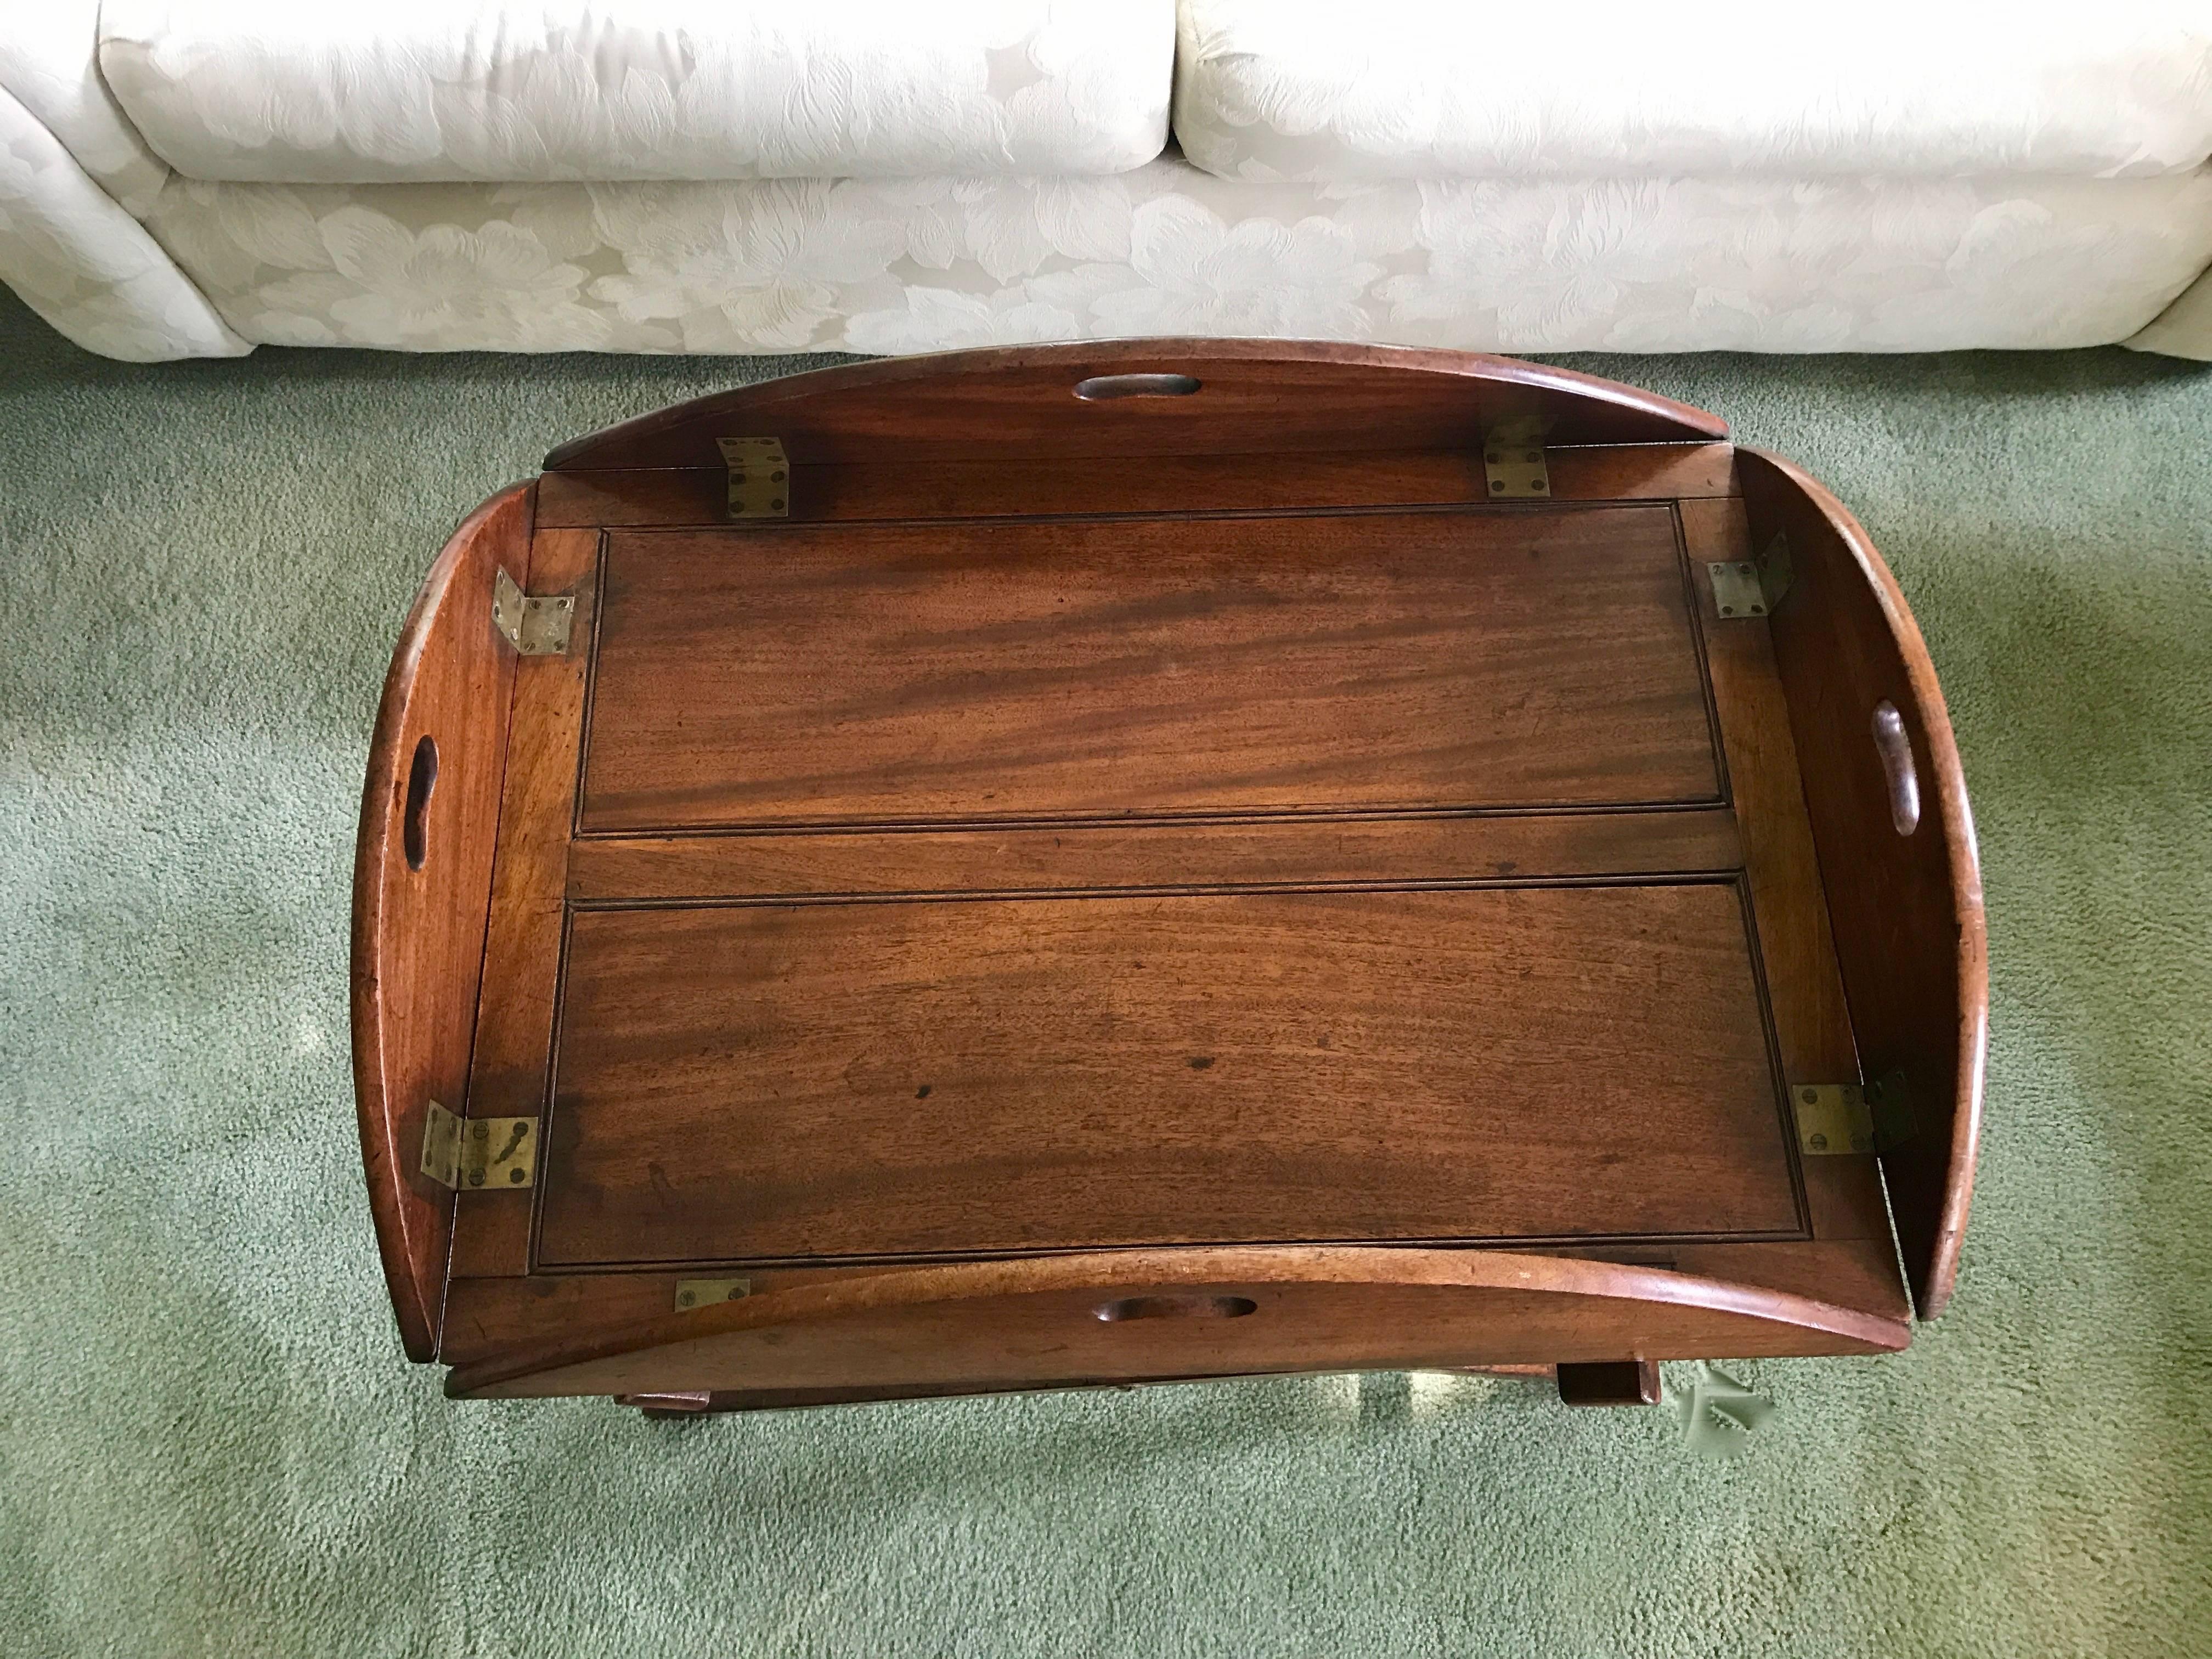 English George III Mahogany Butler’s Tray, circa 1780 with Original Stand, Brass Hinges